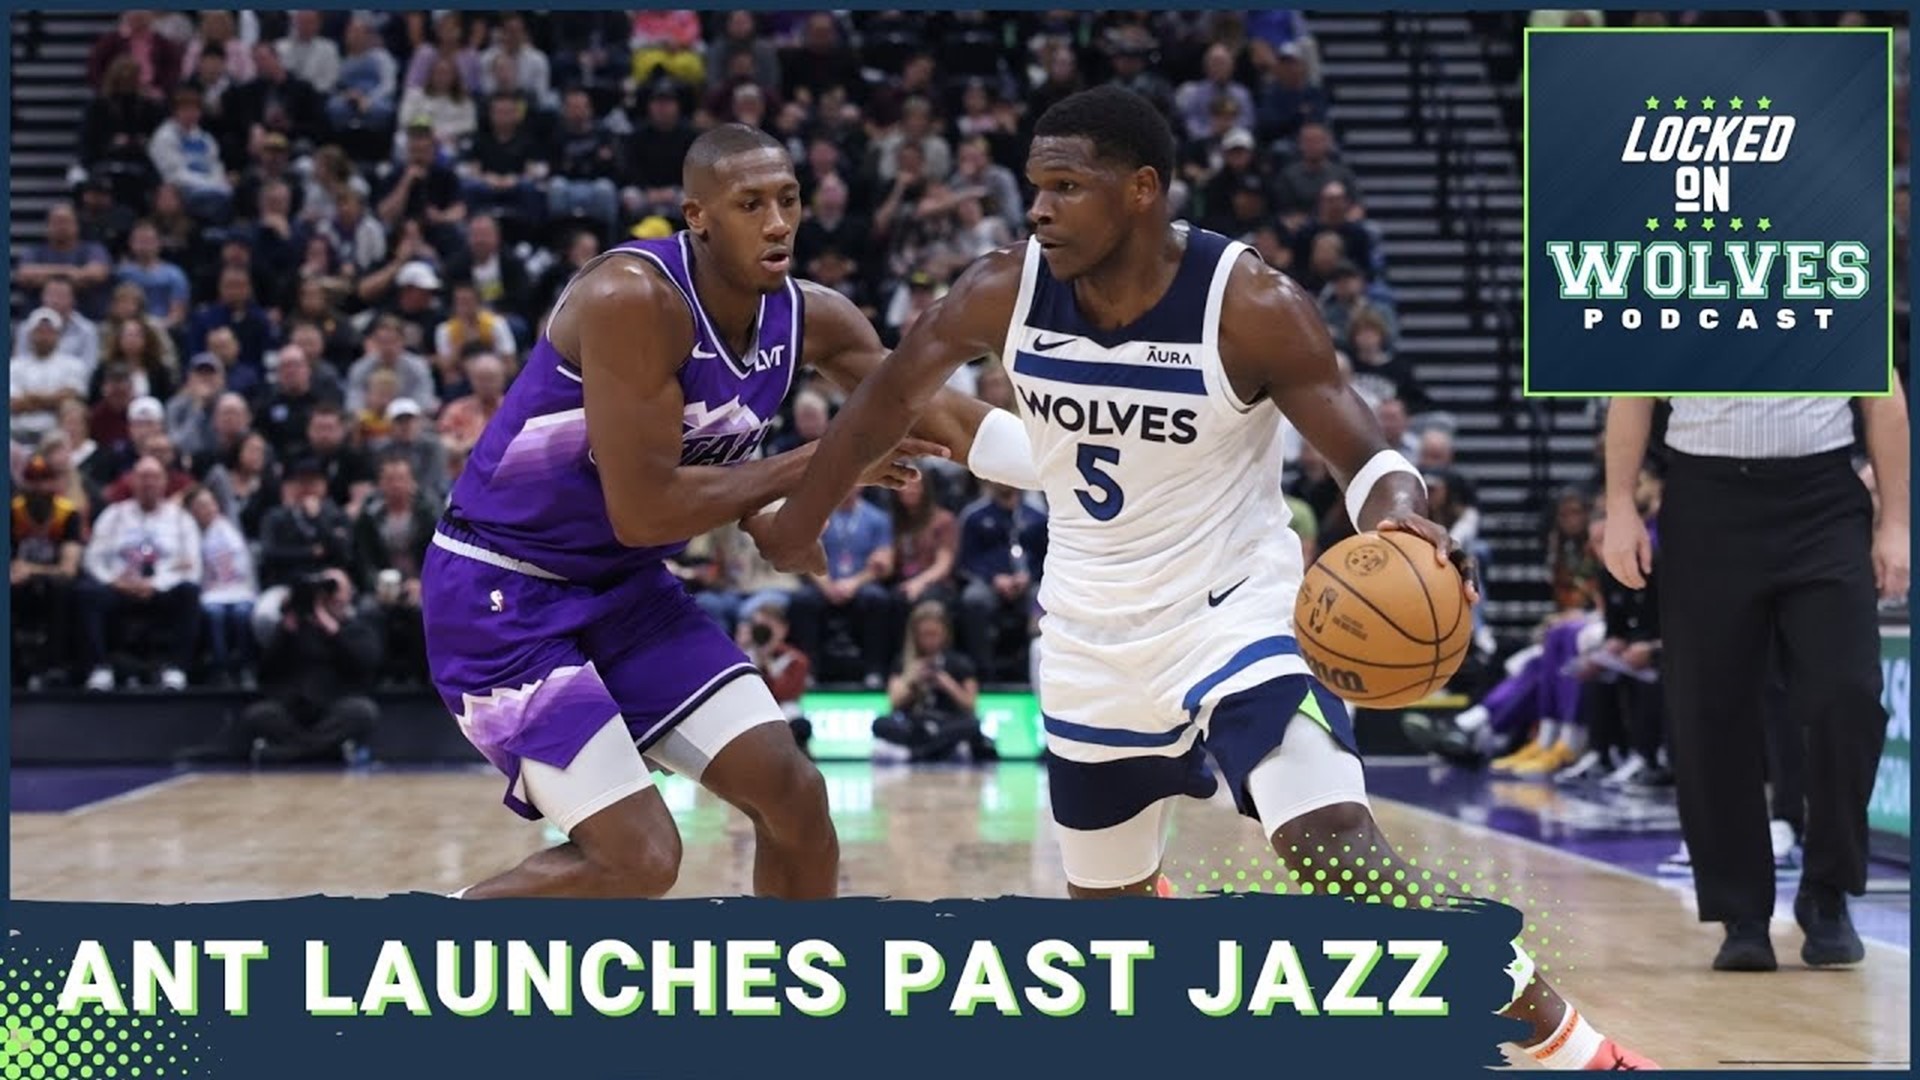 Anthony Edwards launches Minnesota Timberwolves past the Utah Jazz in memorable performance